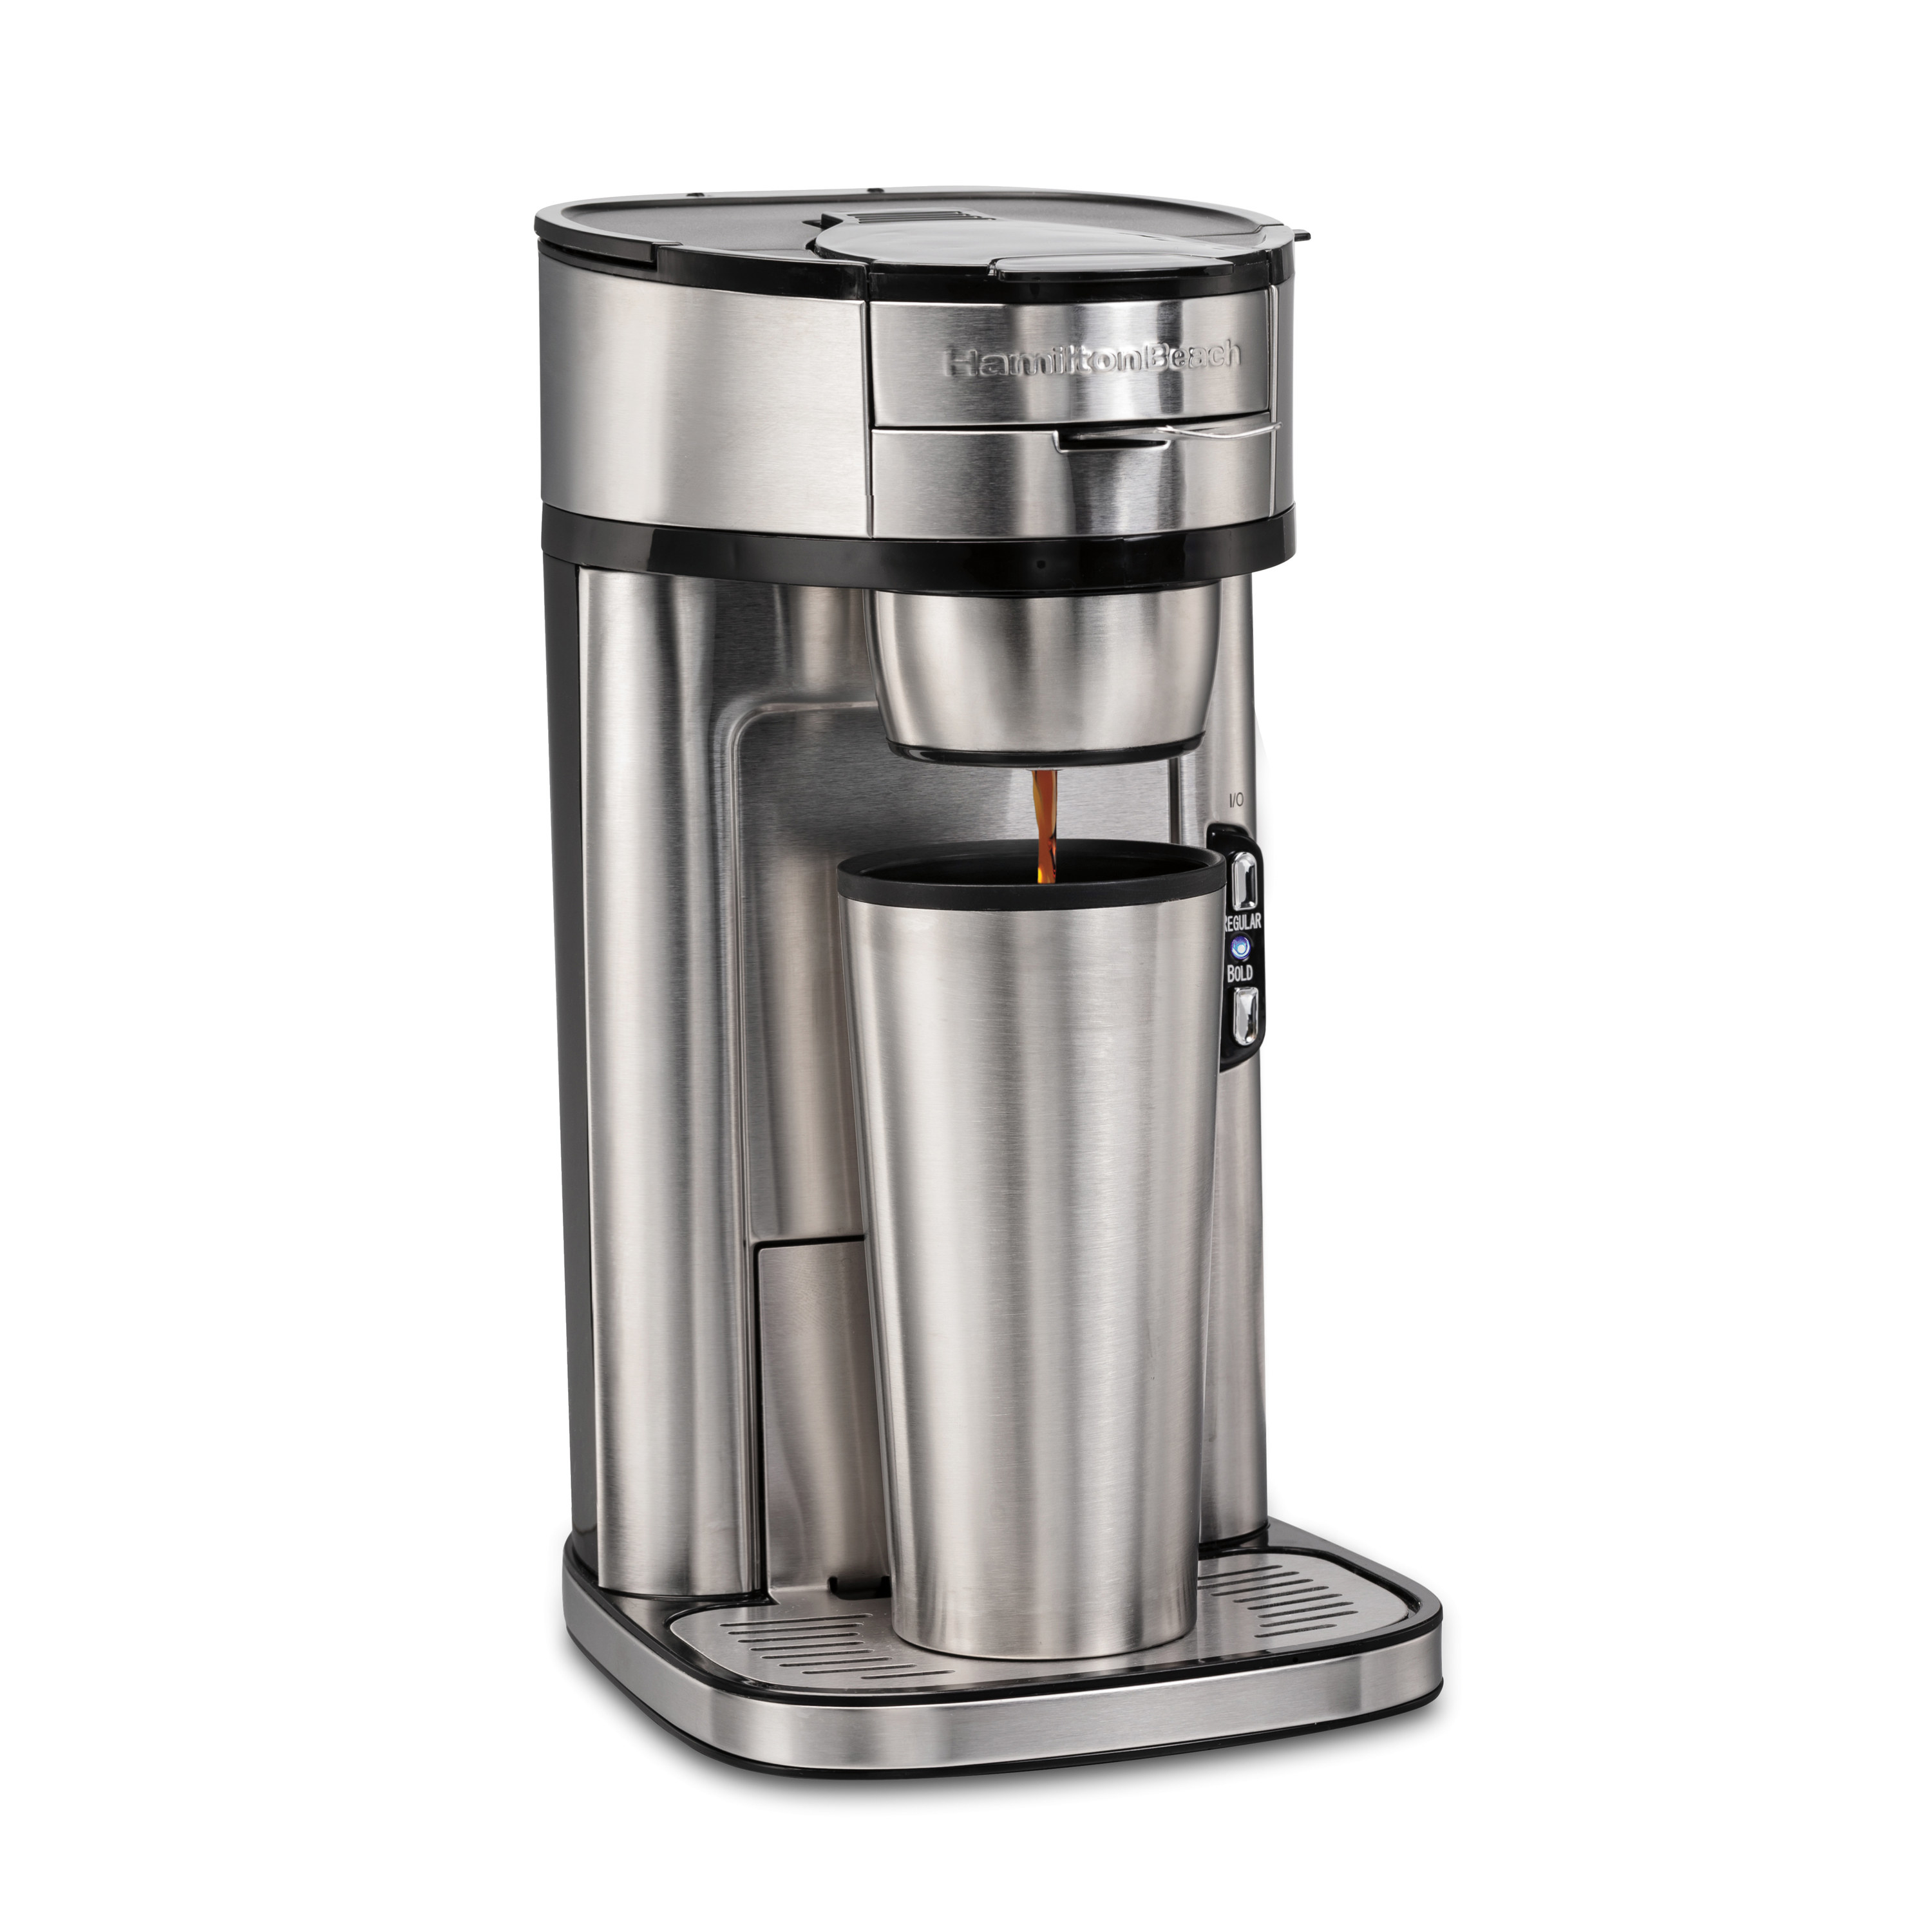 the stainless steel coffee maker